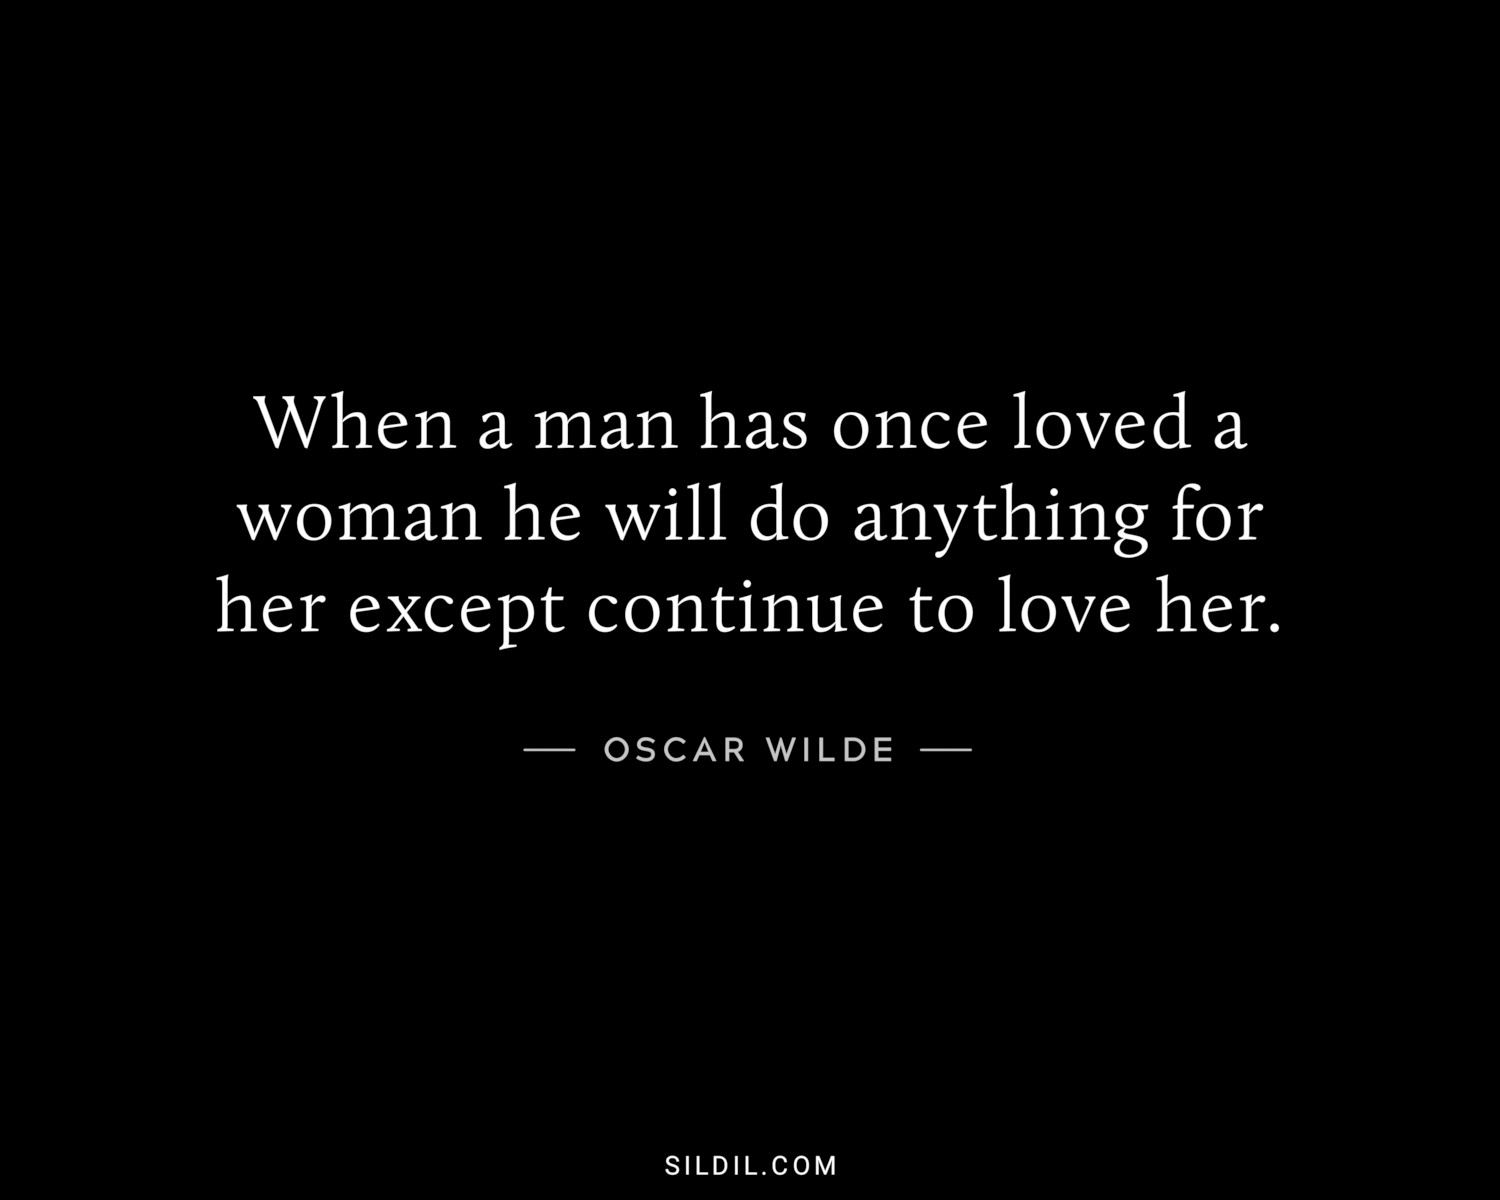 When a man has once loved a woman he will do anything for her except continue to love her.